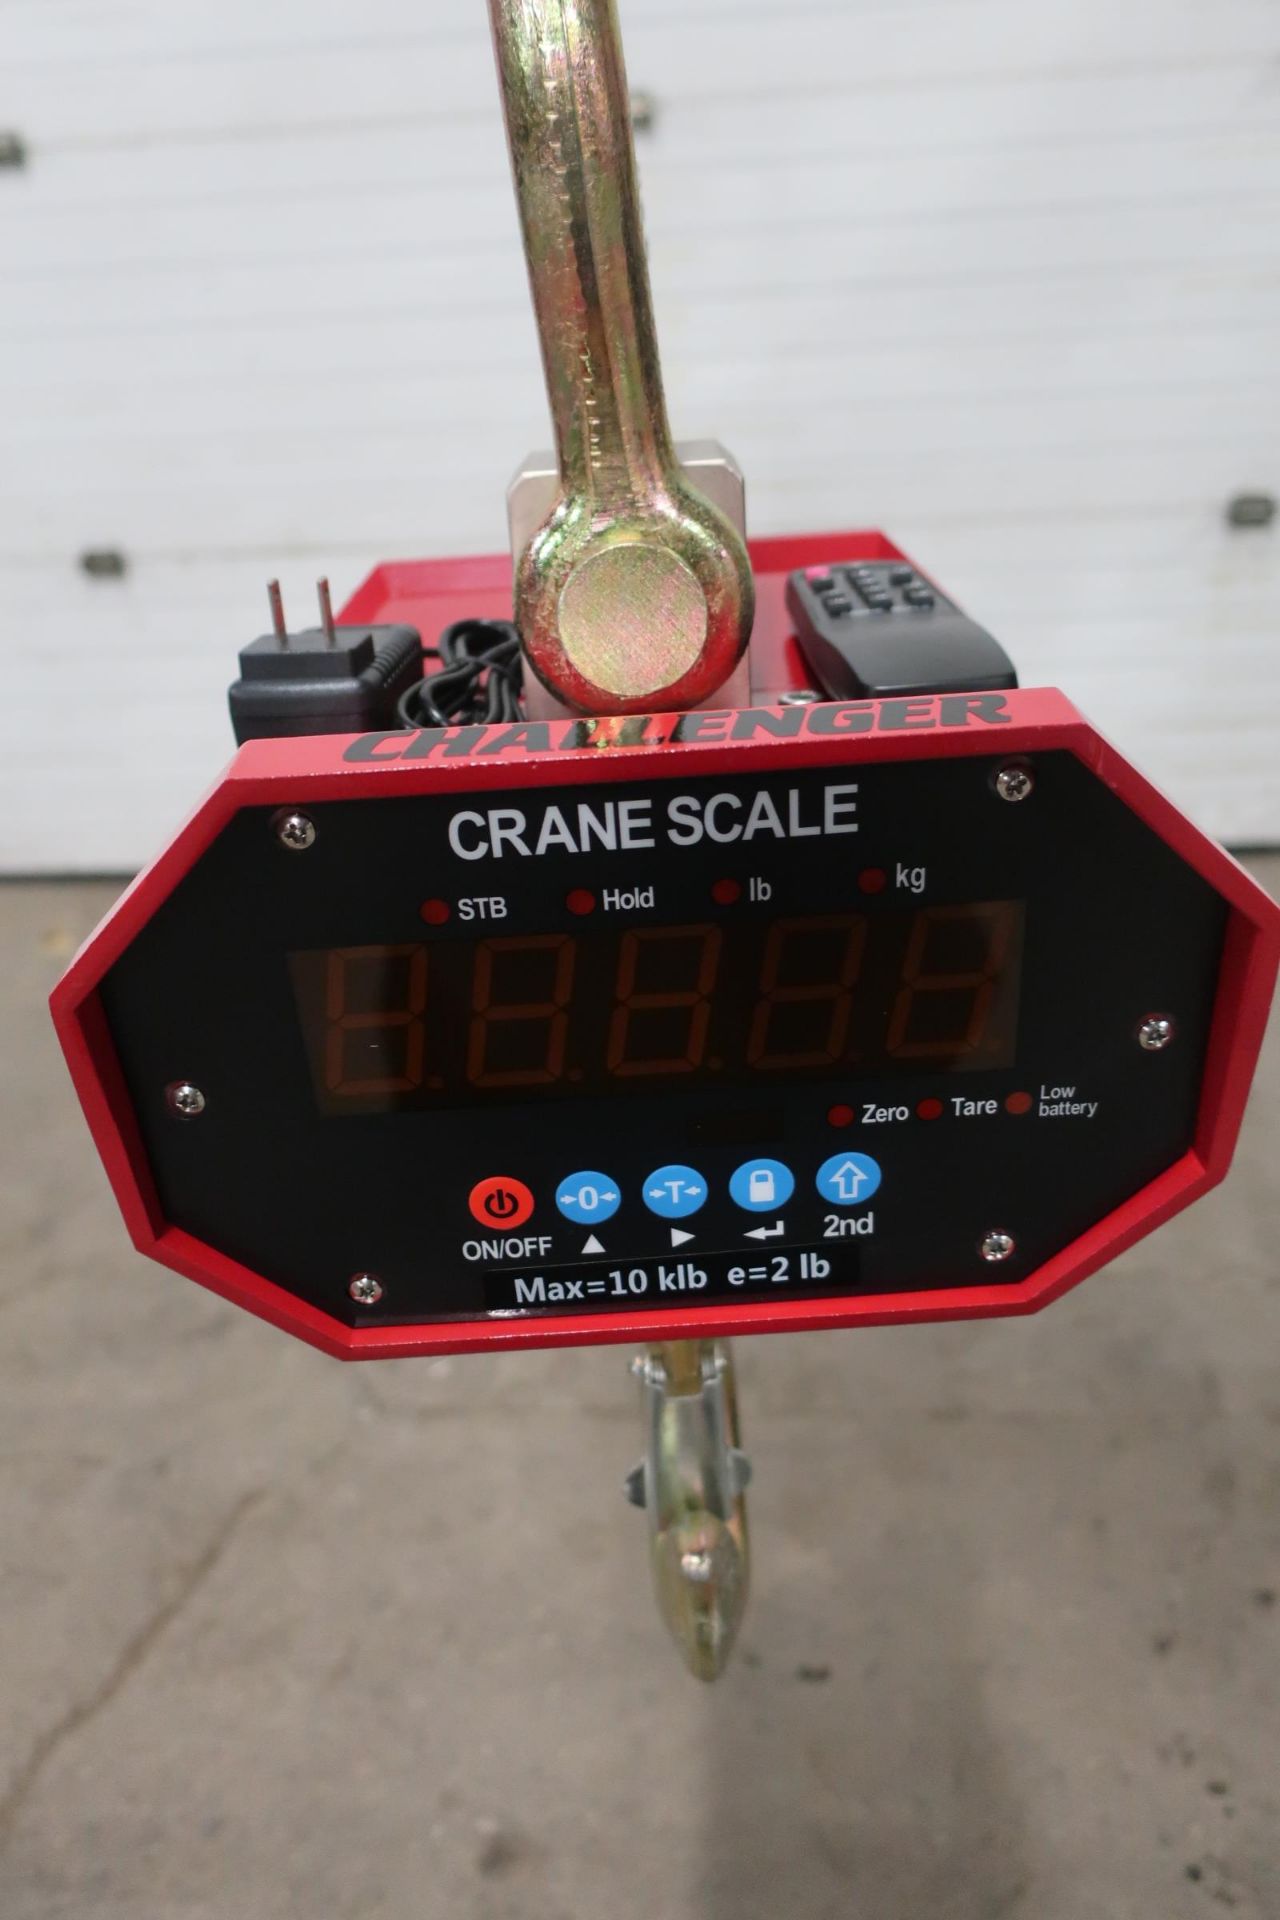 Hanging MINT Digital Crane Scale 20,000lbs 10 ton Capacity - complete with remote control and - Image 2 of 3